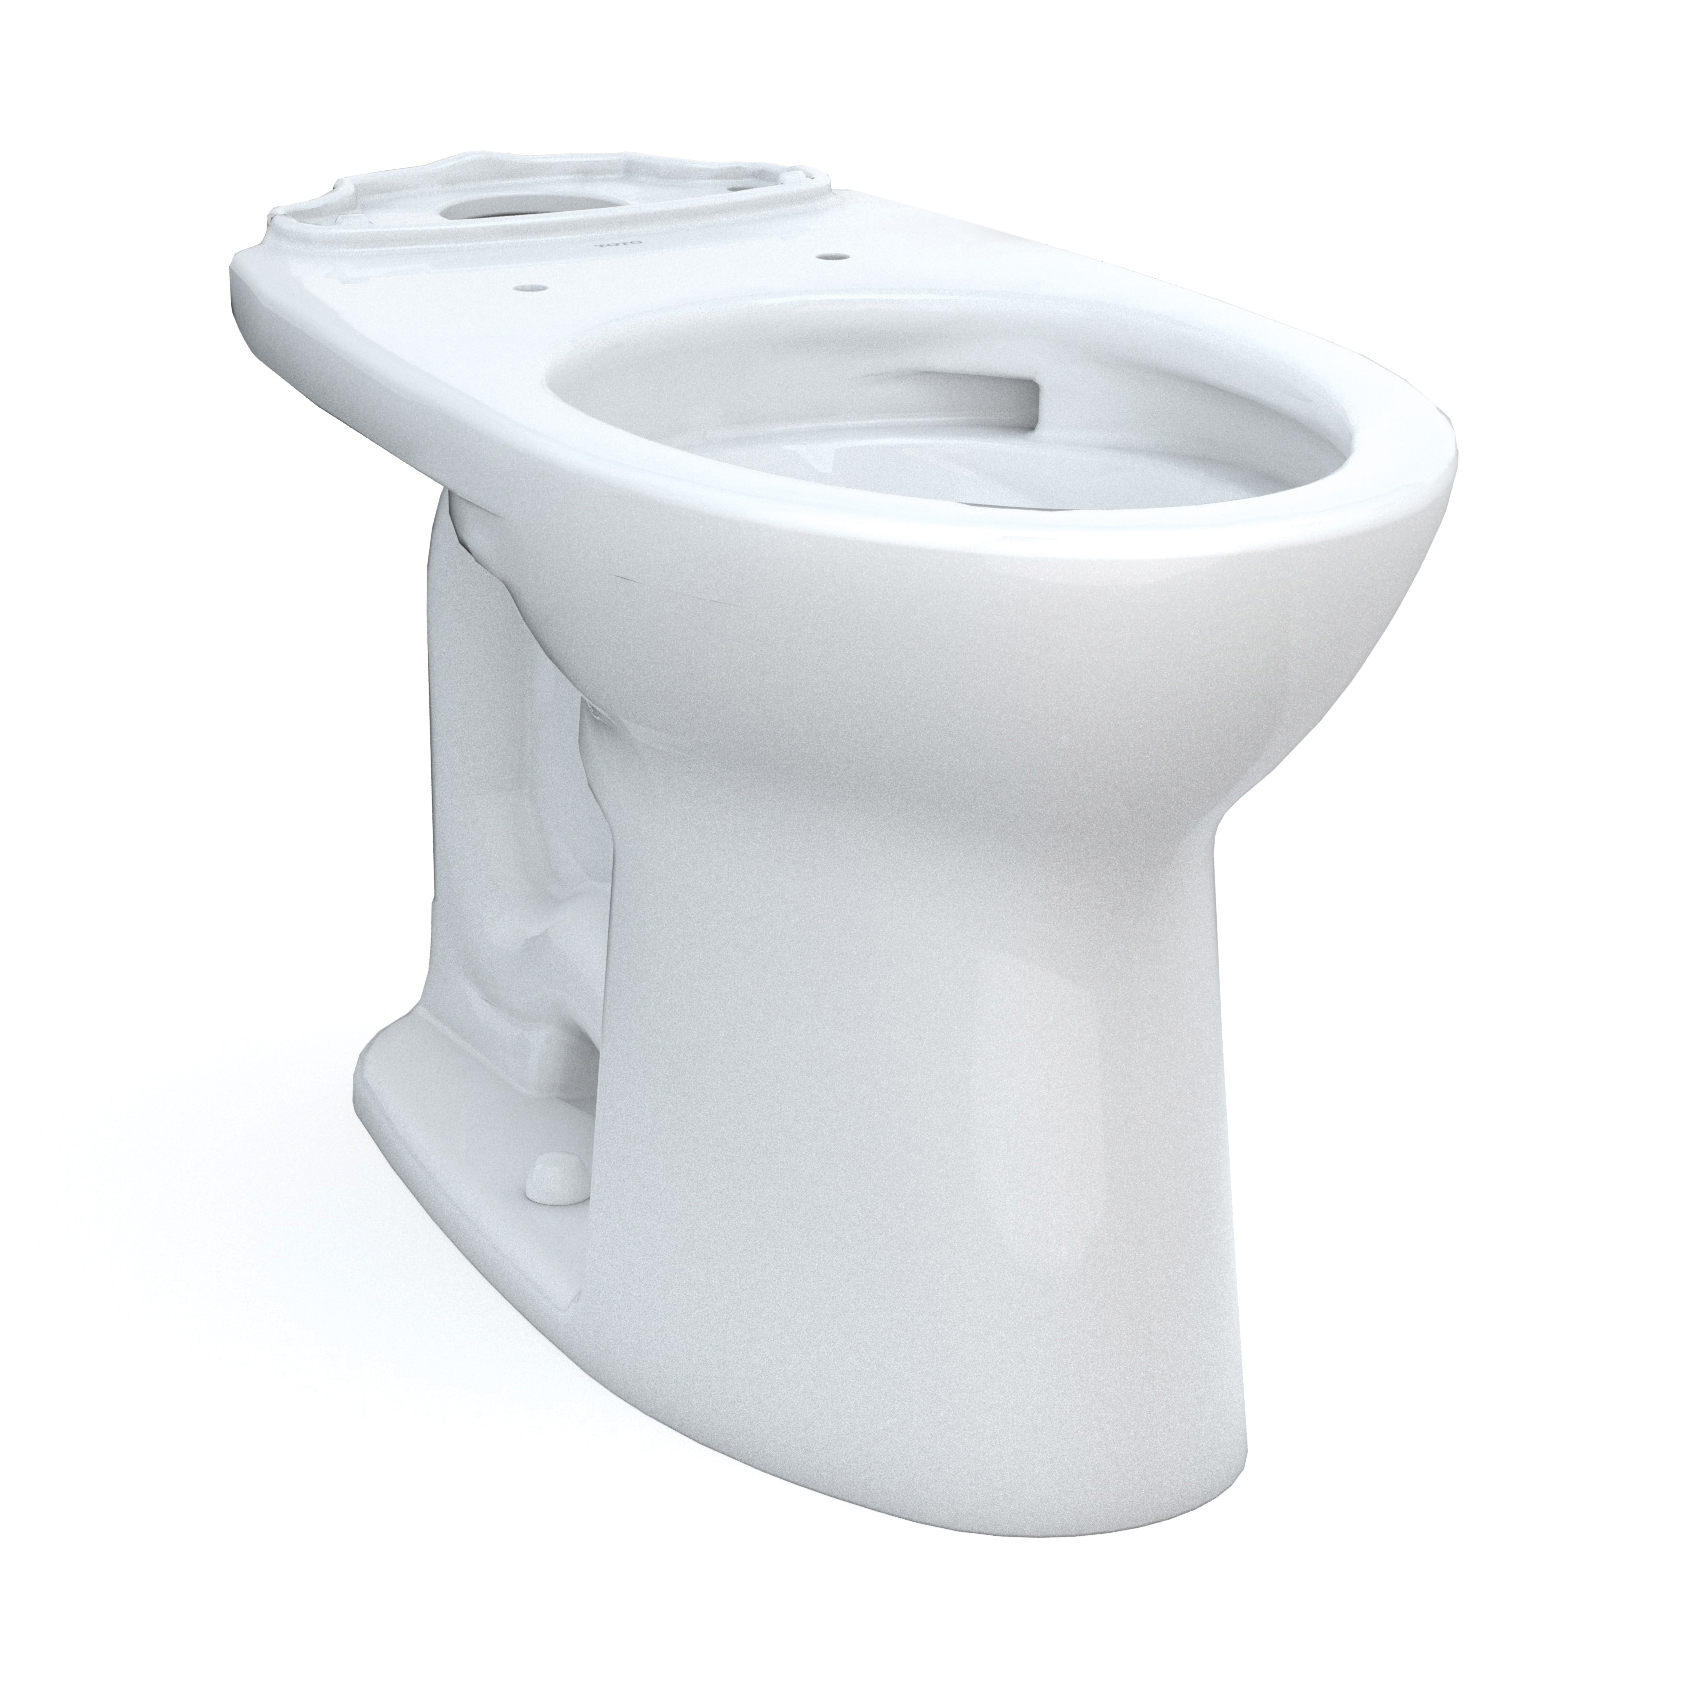 Toto® C776CEFG#01 Universal Height Toilet Bowl With CEFIONTECT® Technology, Drake®, Cotton White, Elongated Shape, 12 in Rough-In, 16-1/8 in H Rim, 2-1/8 in Trapway